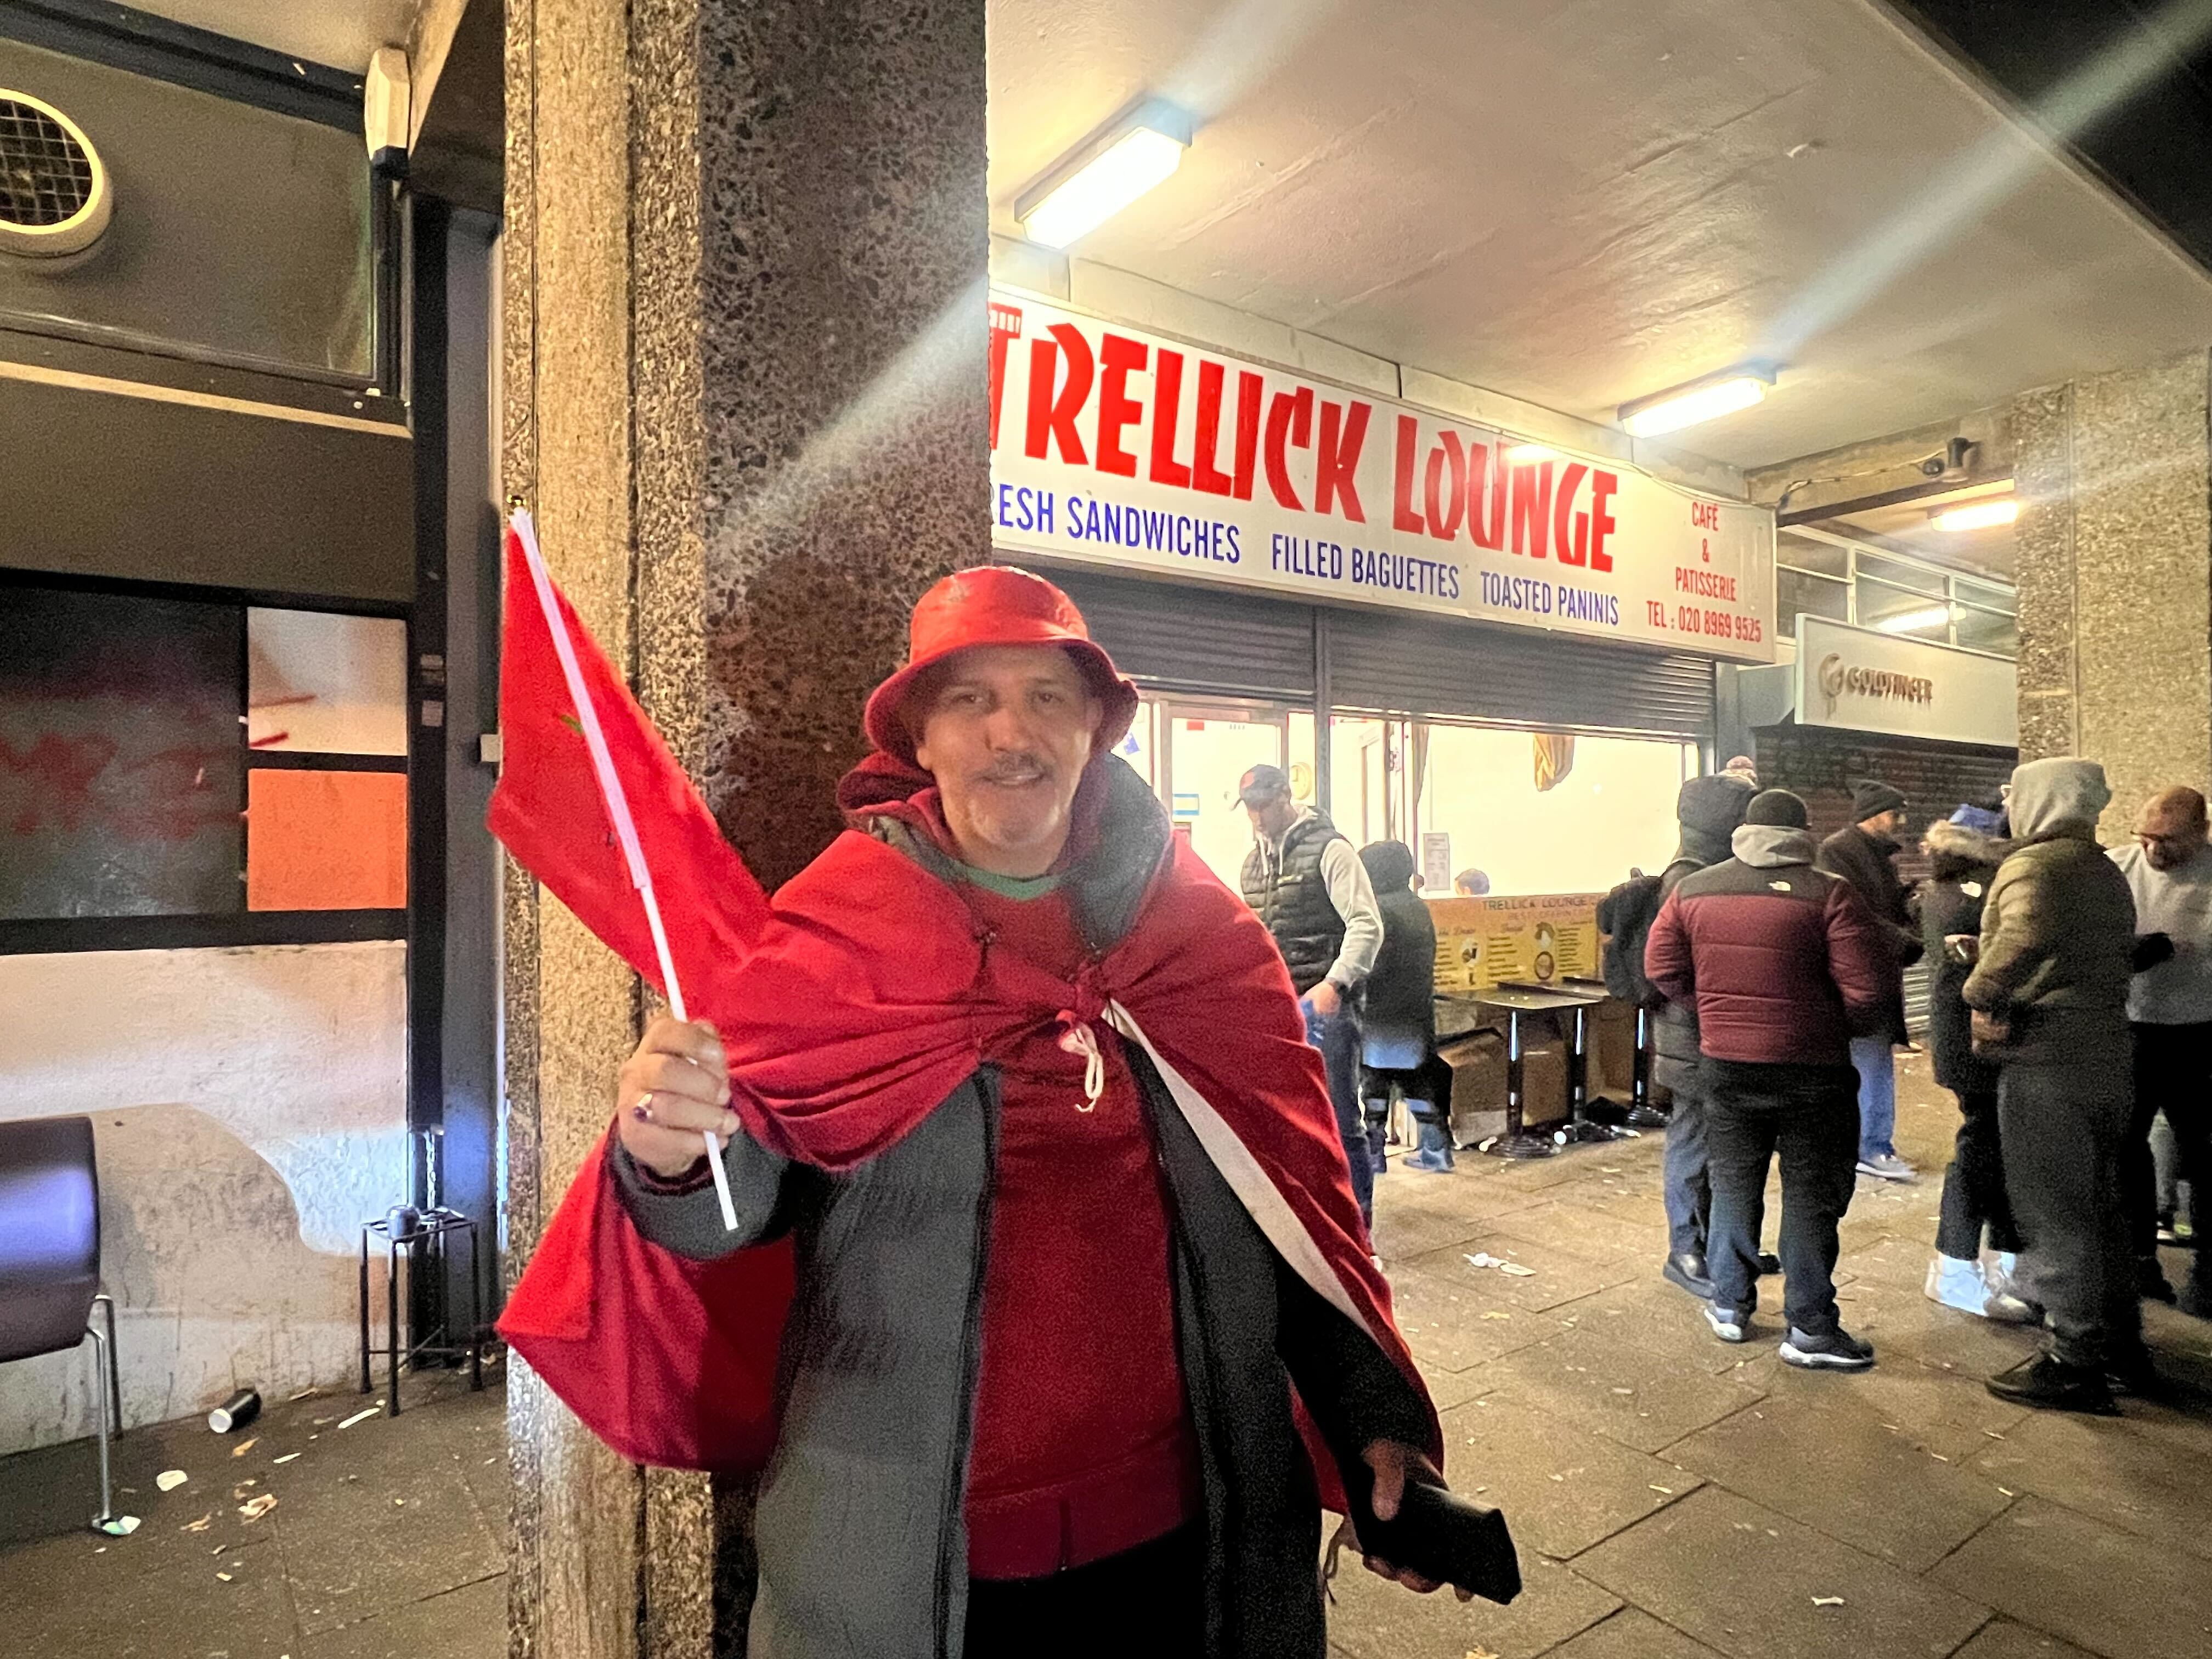 Mohamed remains hopeful after Morocco's defeat and stands outside the Trellick lounge on Golborne road (MEE/Areeb Ullah)